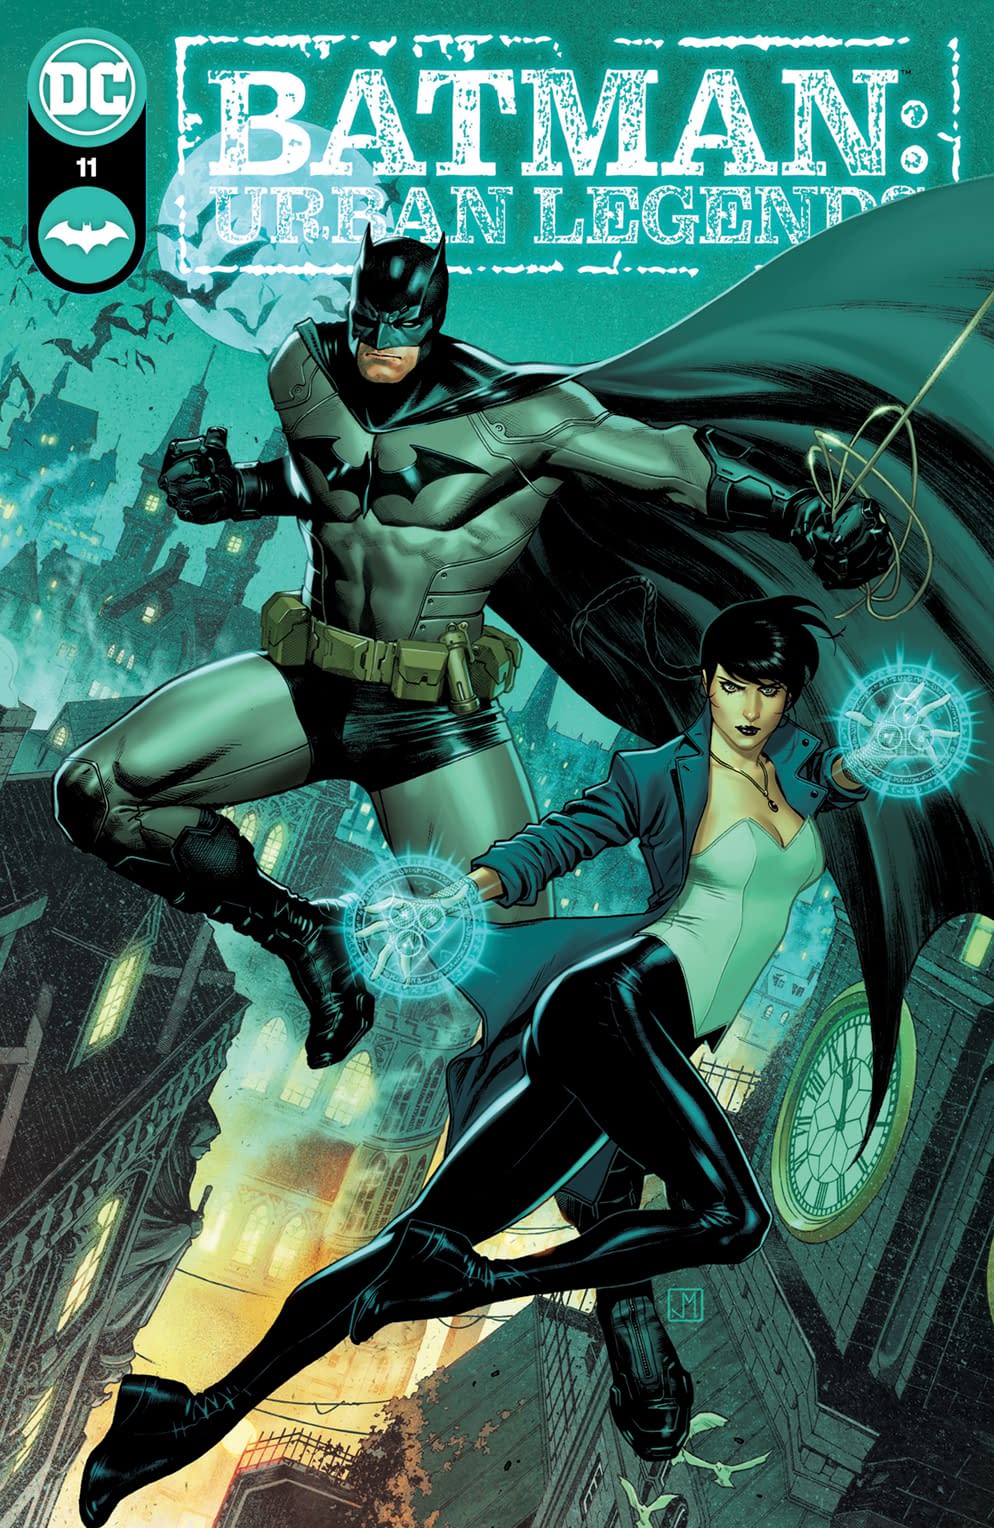 Batman: Urban Legends #11 Preview: What Are Batman and Zatanna Up To?!